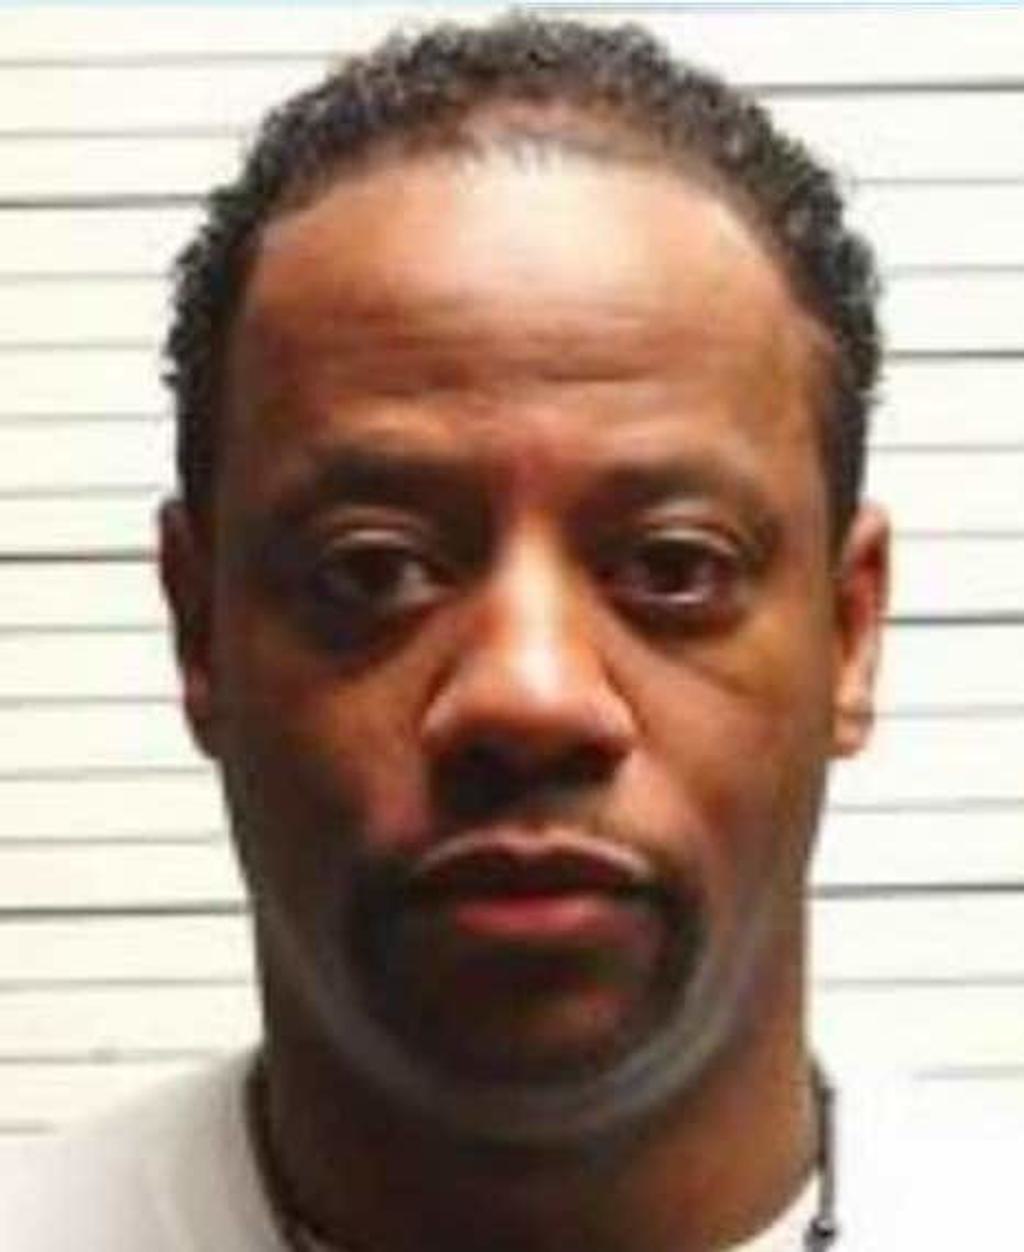 In Case Permeated with Race Bias, Tennessee Plans to Execute Possibly Innocent and Intellectually Disabled Black Man in Murder of White Woman